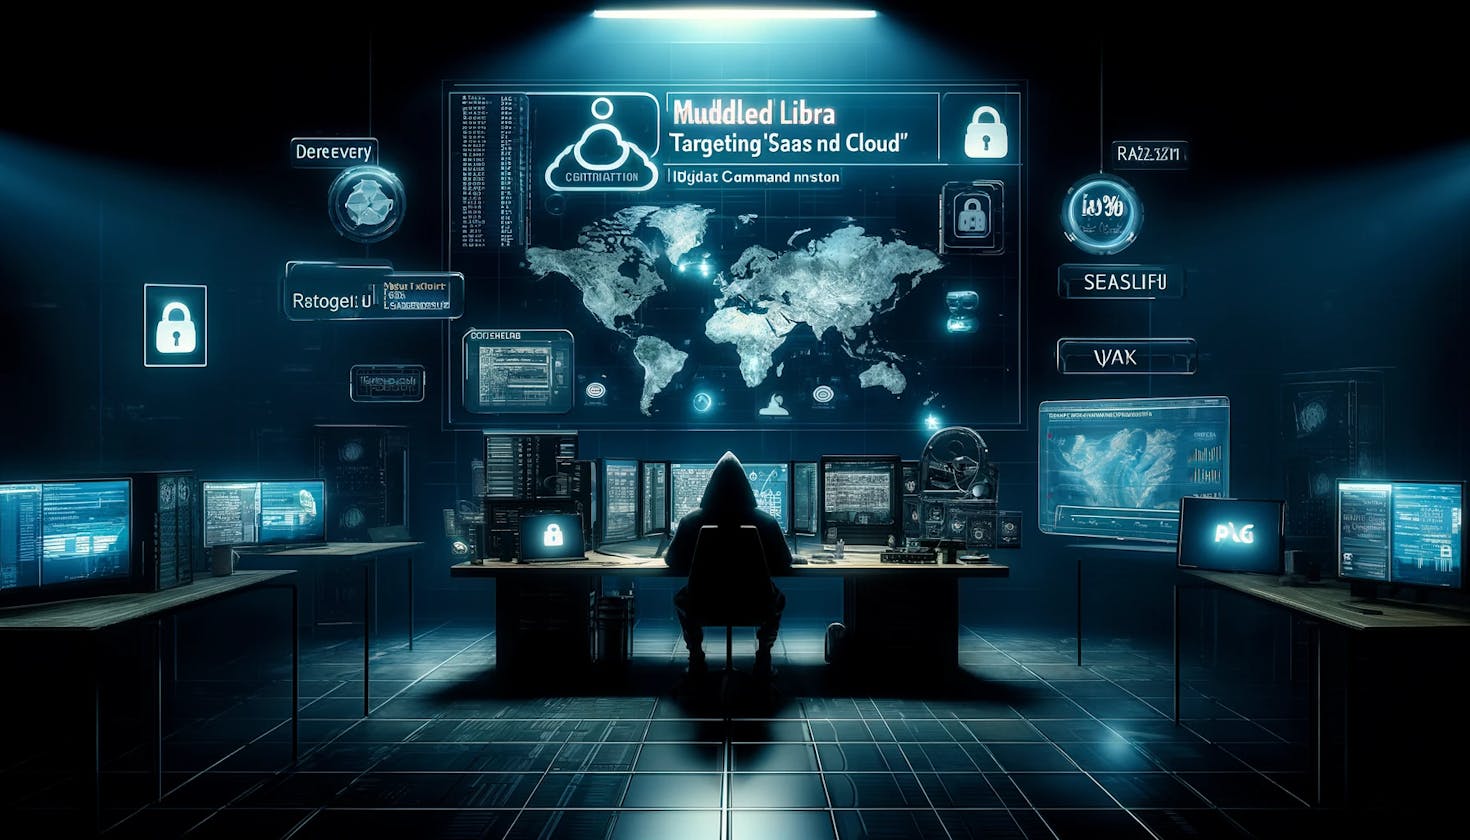 Muddled Libra Threat Group Targets SaaS and Cloud Platforms for Data Discovery and Exfiltration, Write-up Shared on X